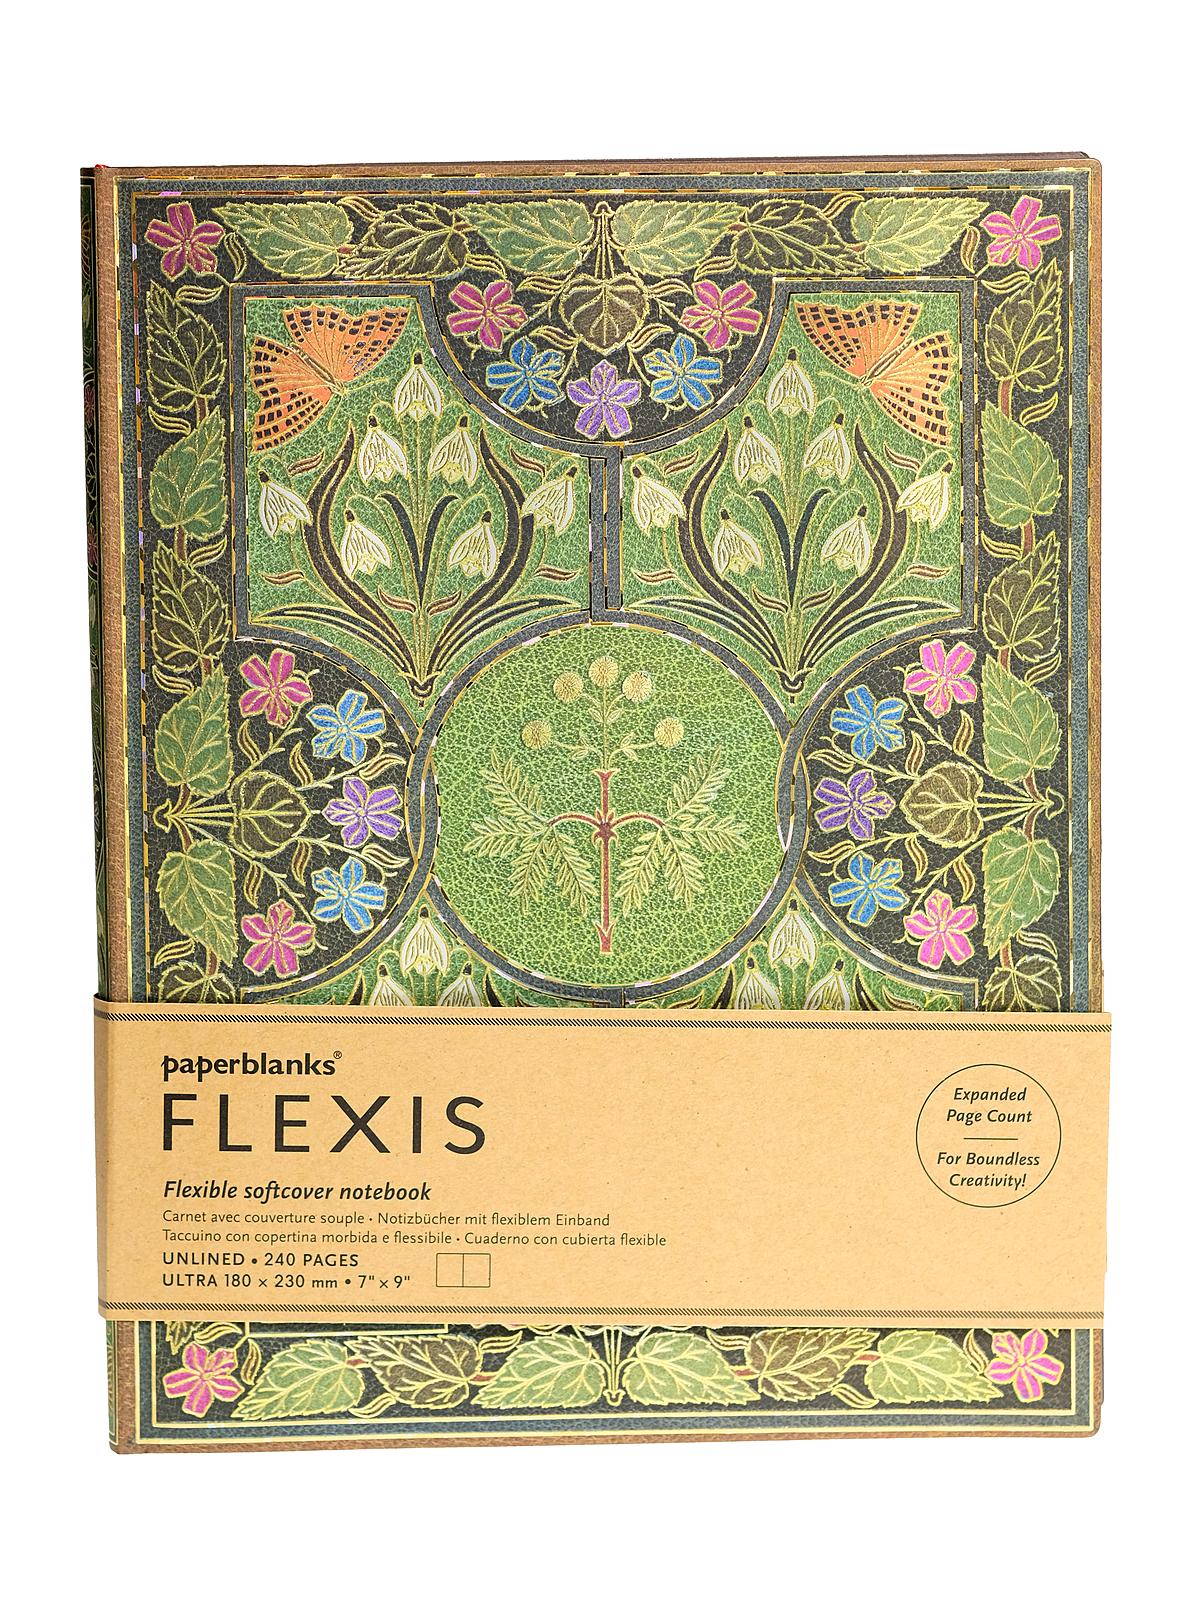 Poetry In Bloom Flexis Ultra 240 Pages, Unlined 7 In. X 9 In.